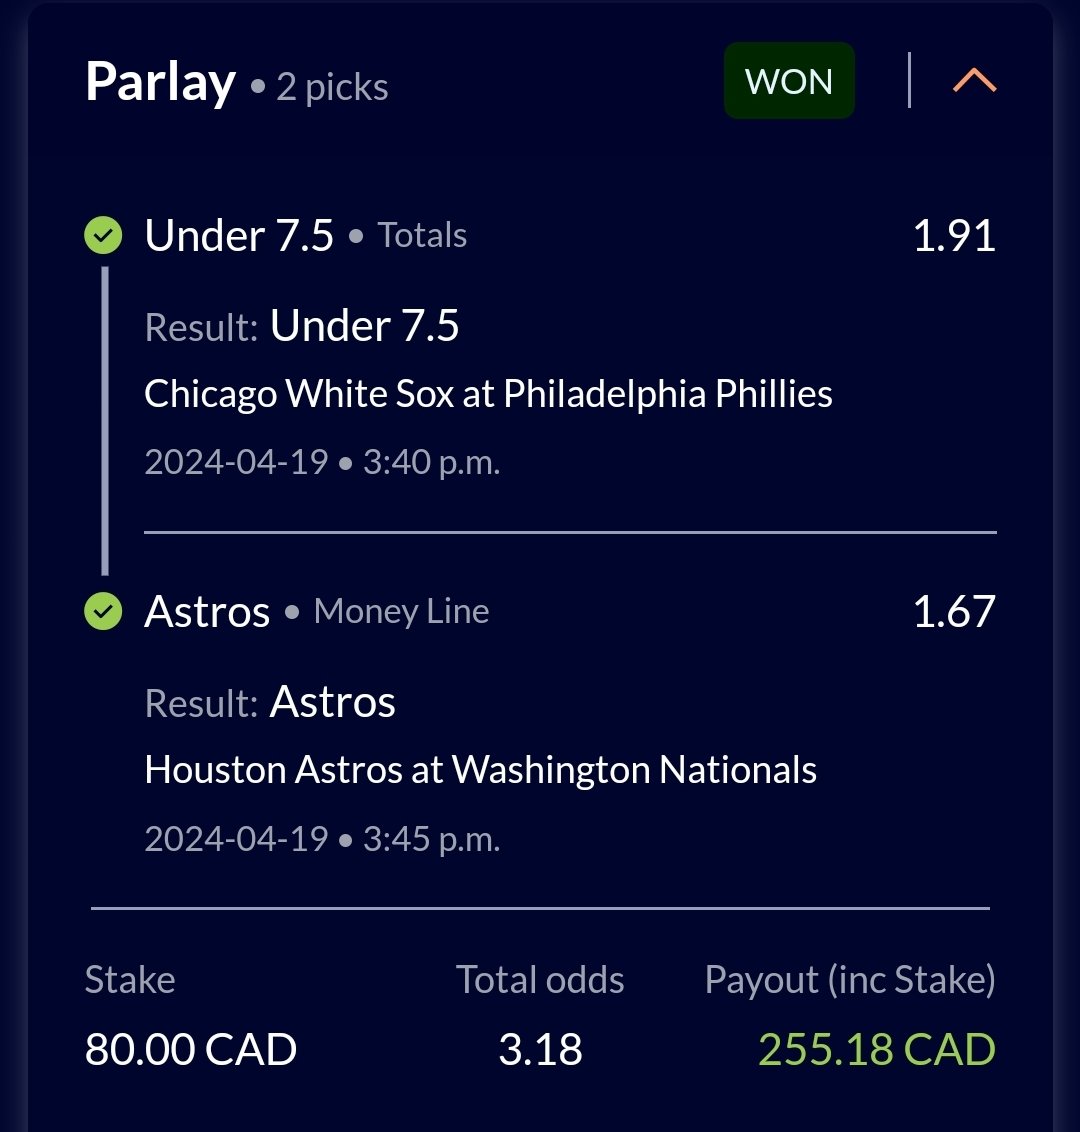 Posting my bets on my other account @ParlaysMlb43725